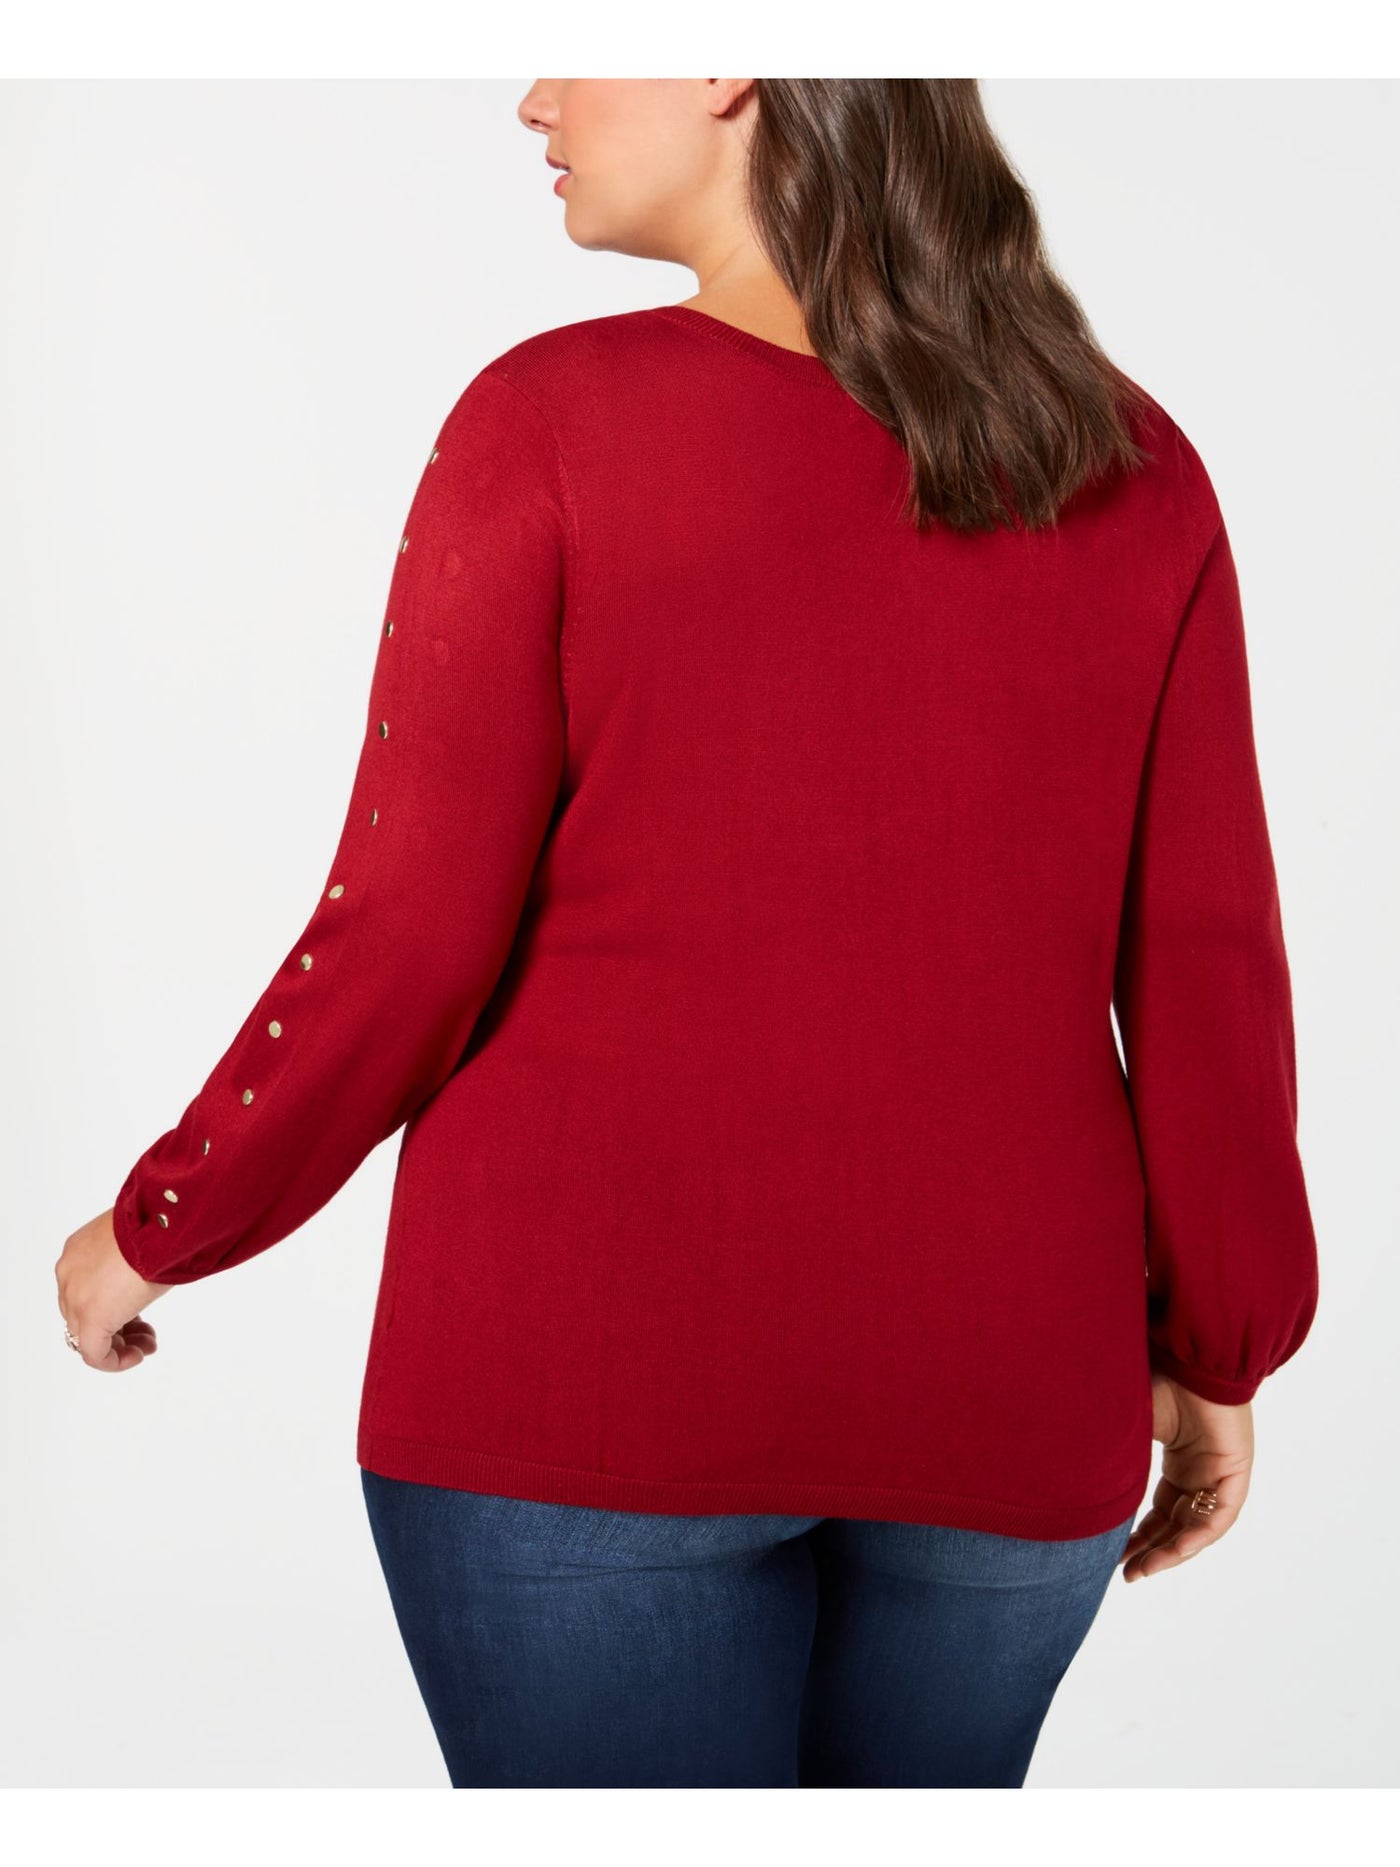 ONE A Womens Long Sleeve Scoop Neck Sweater